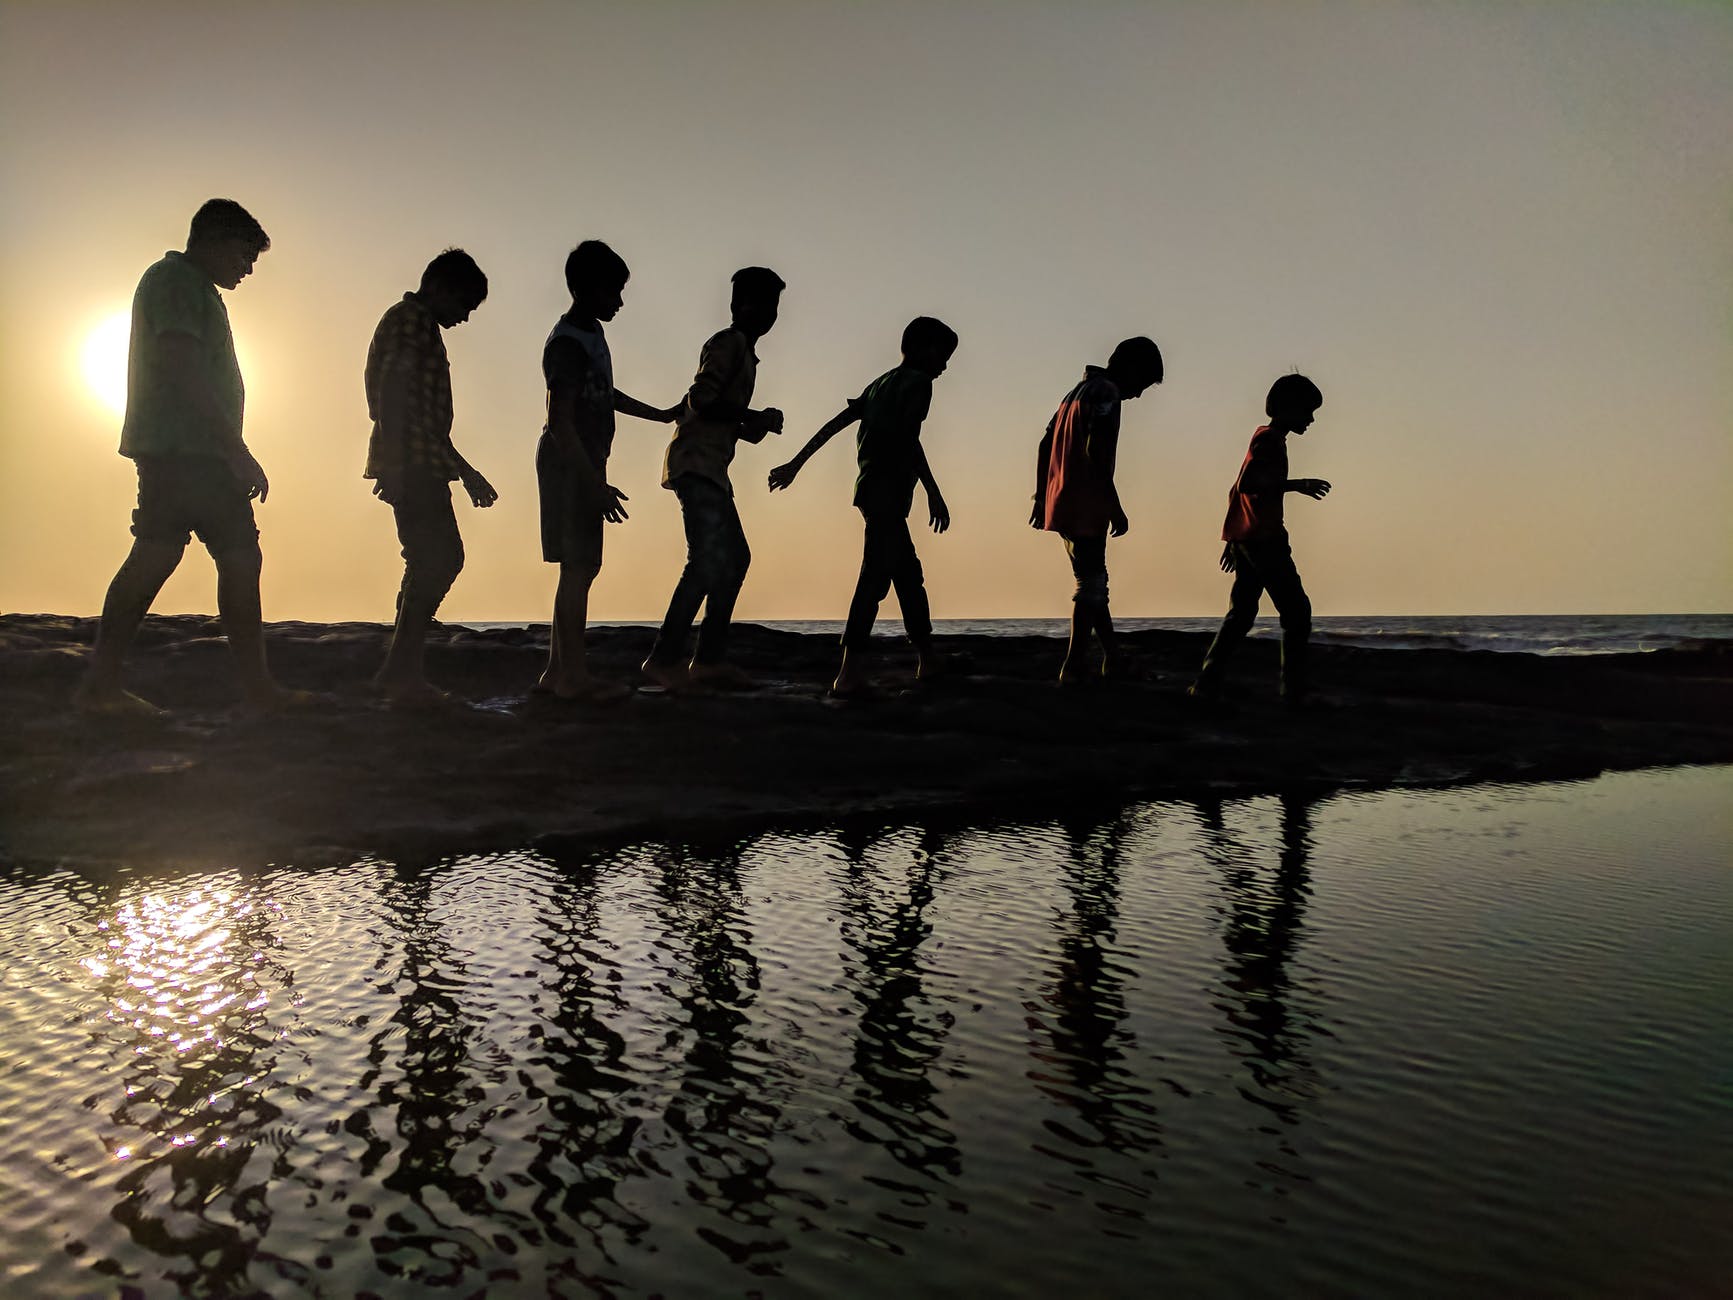 The silhouettes of a group of children walking near body of water. Are children our future?